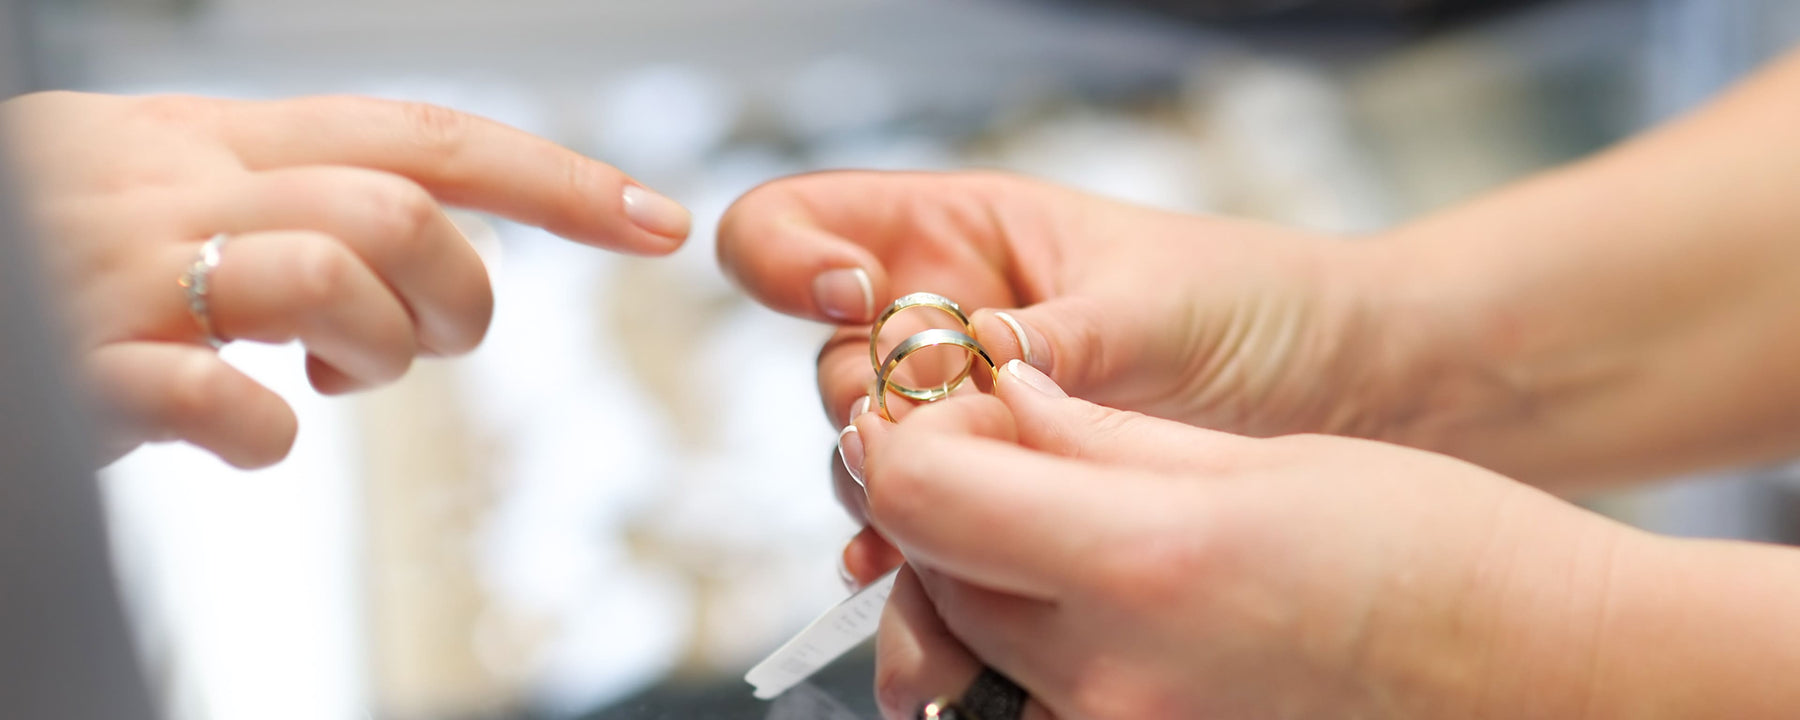 An associate presents two rings while a customer points to one